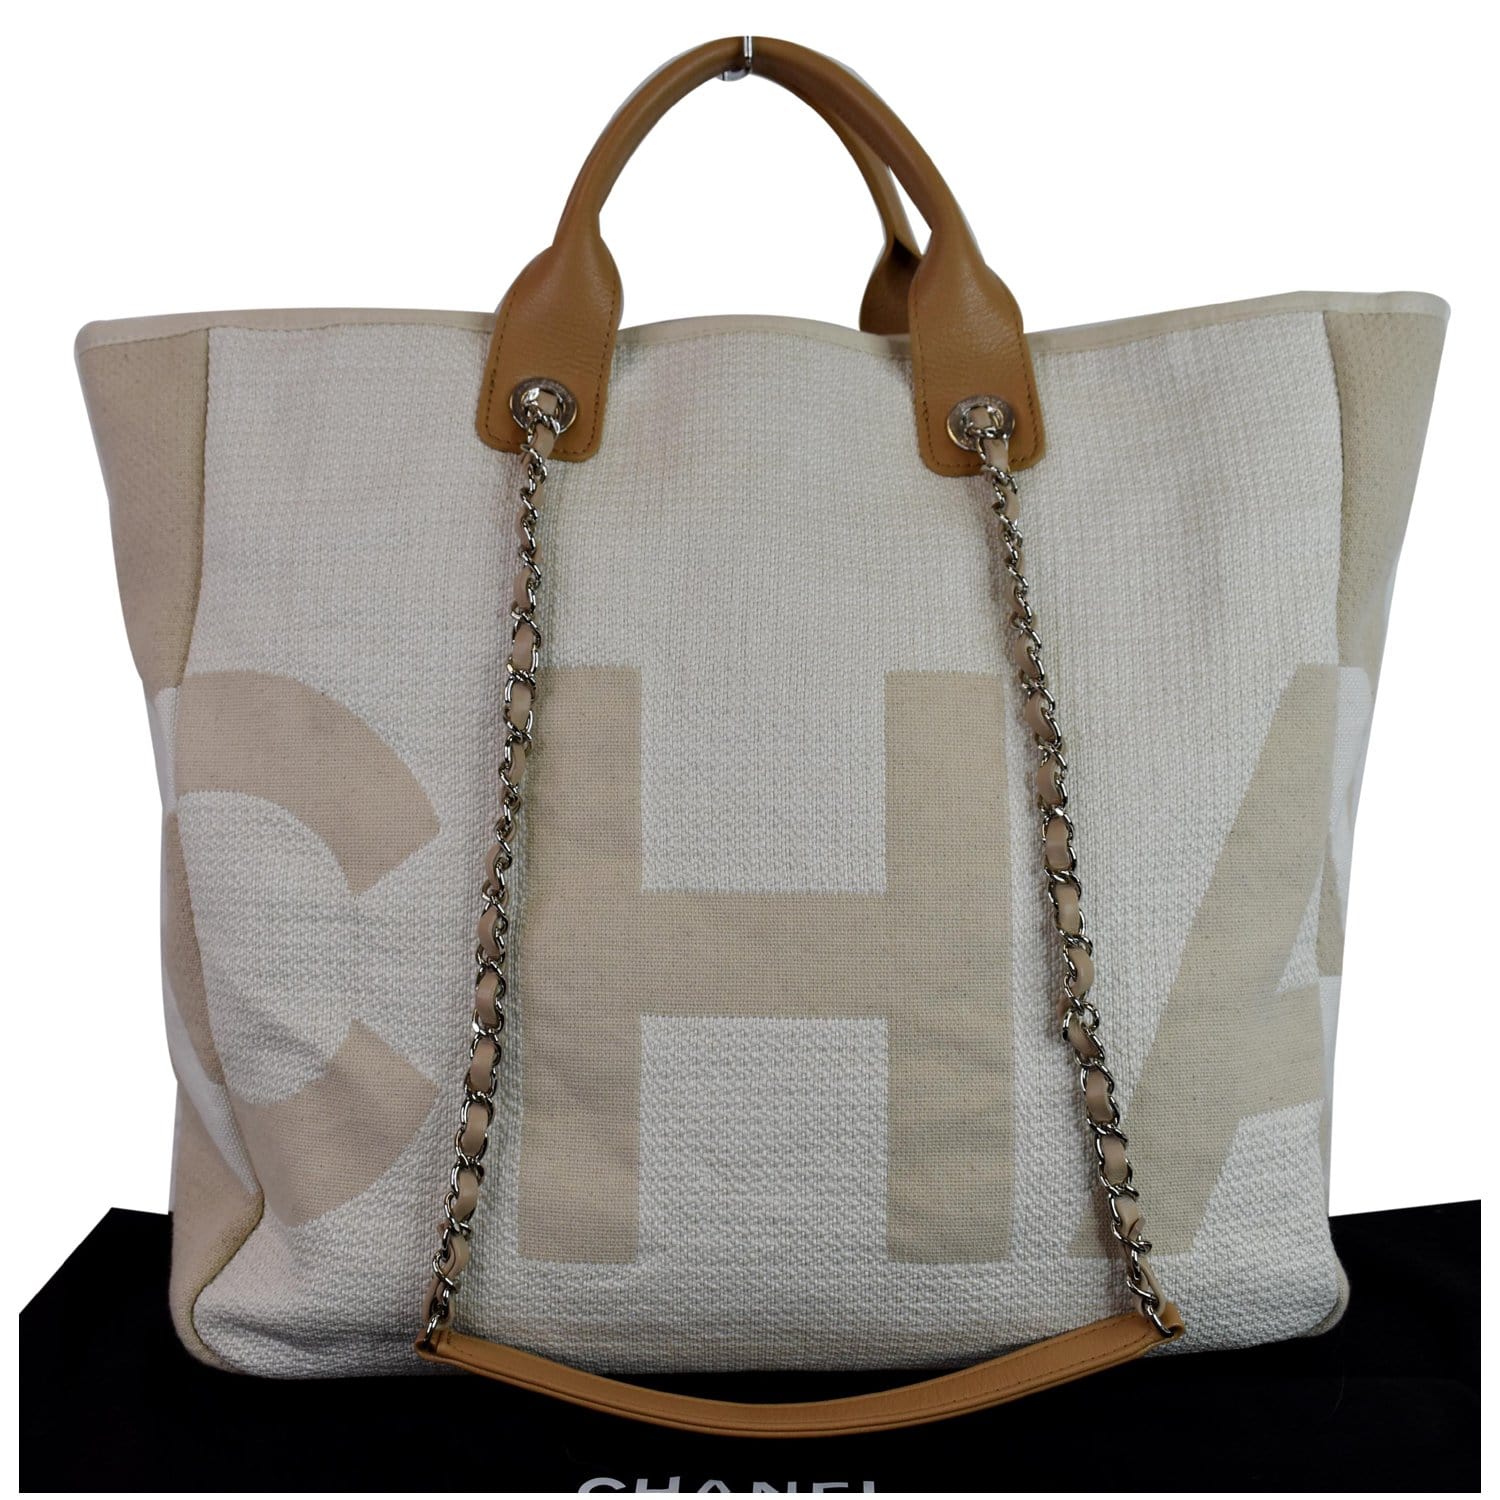 Sold at Auction: Chanel - Large Deauville Tote Shoulder Bag - Tan Canvas  Rue Cambon